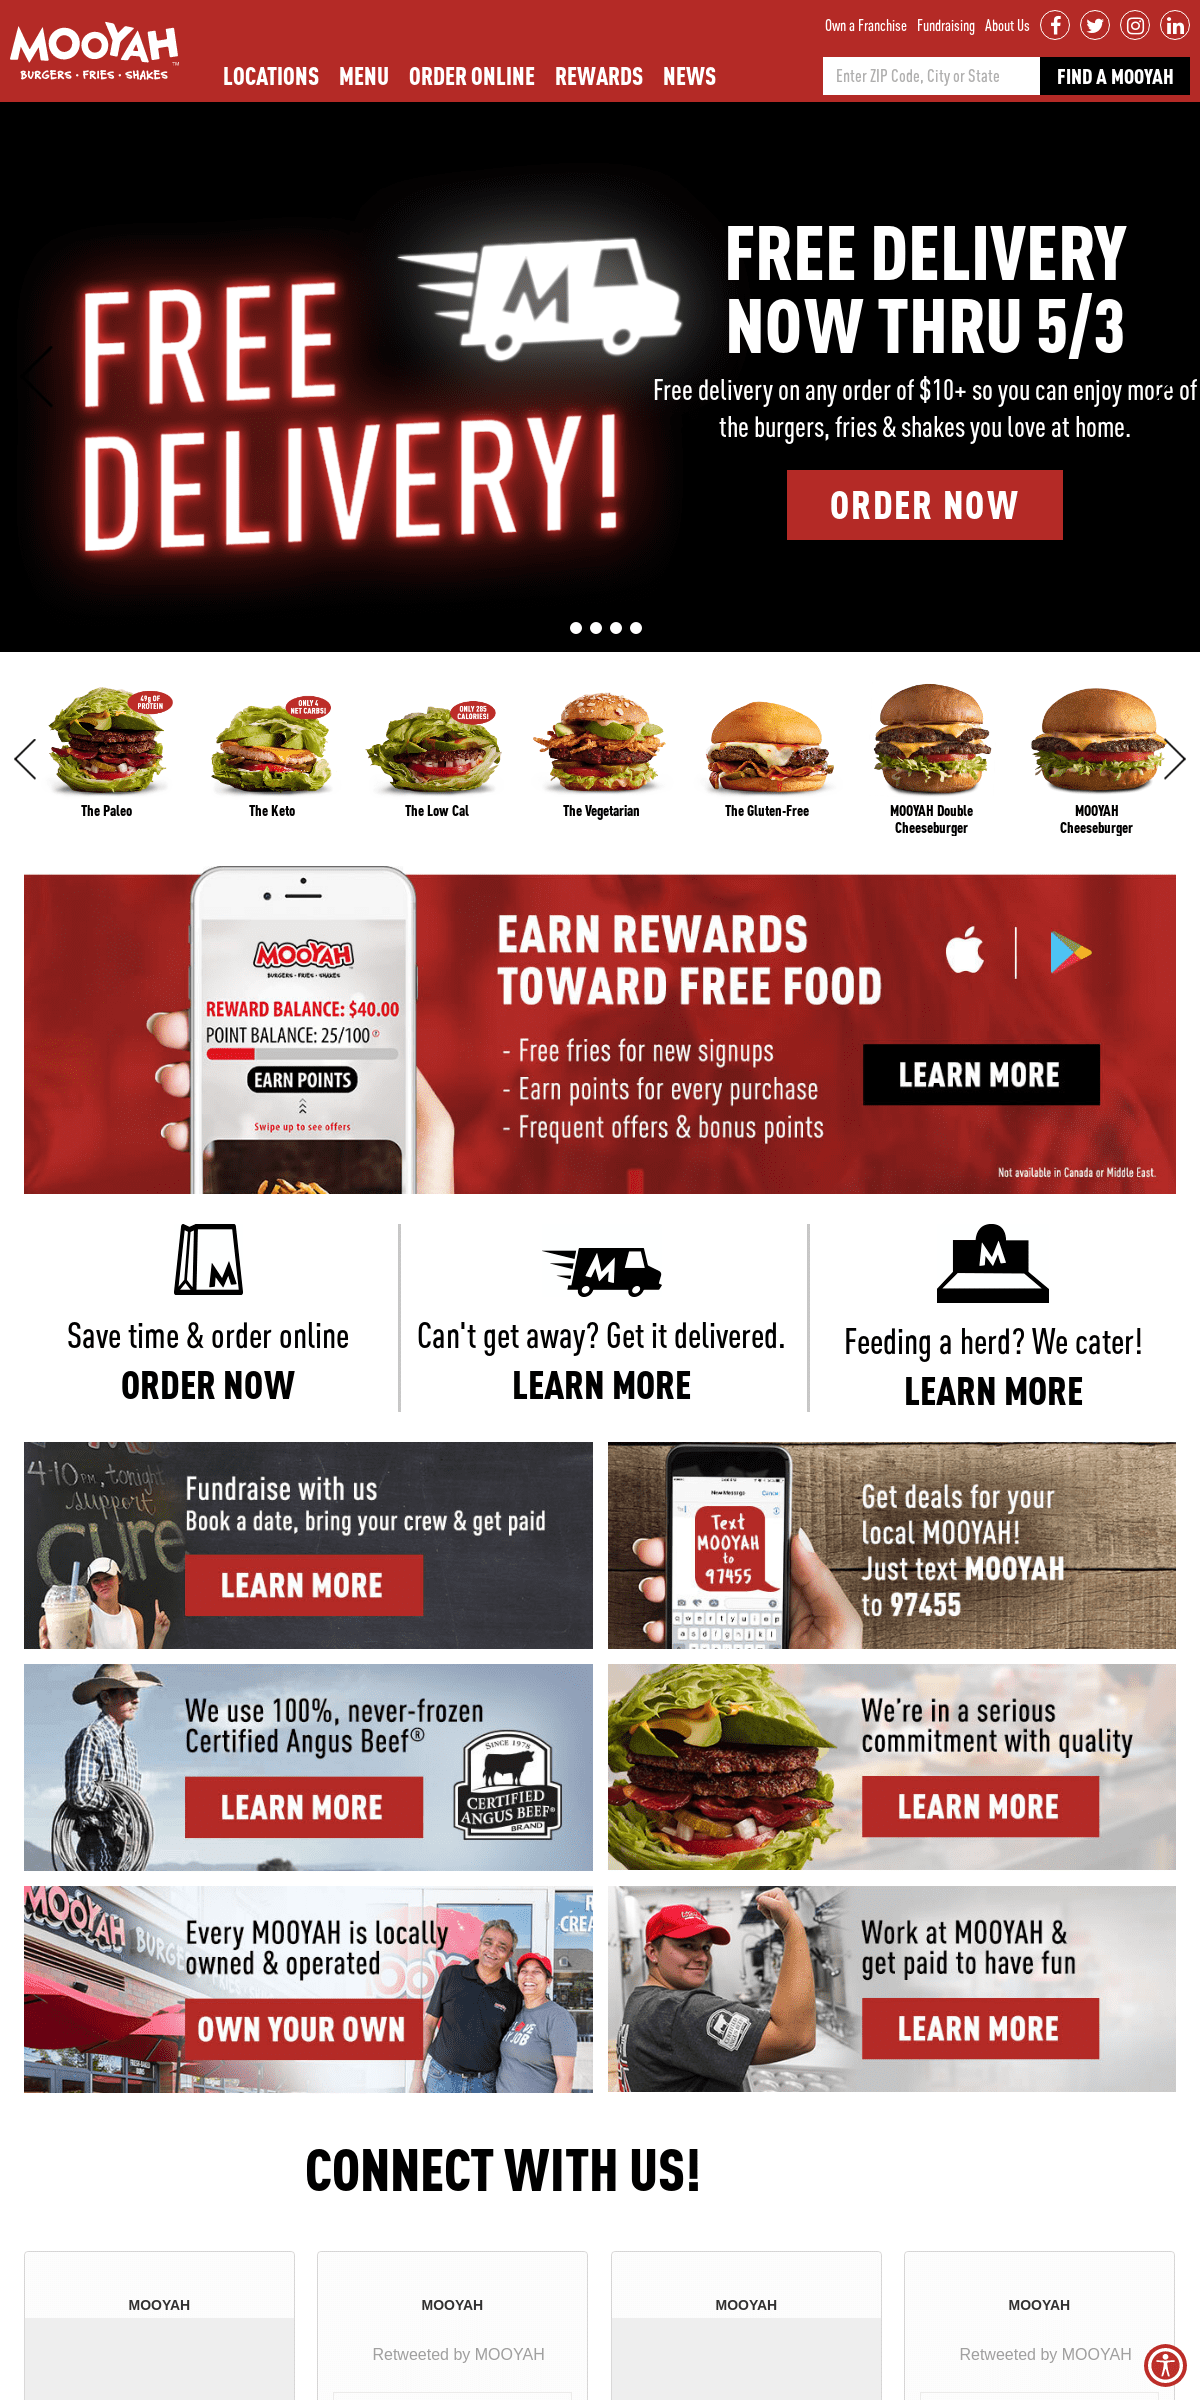 A complete backup of mooyah.com